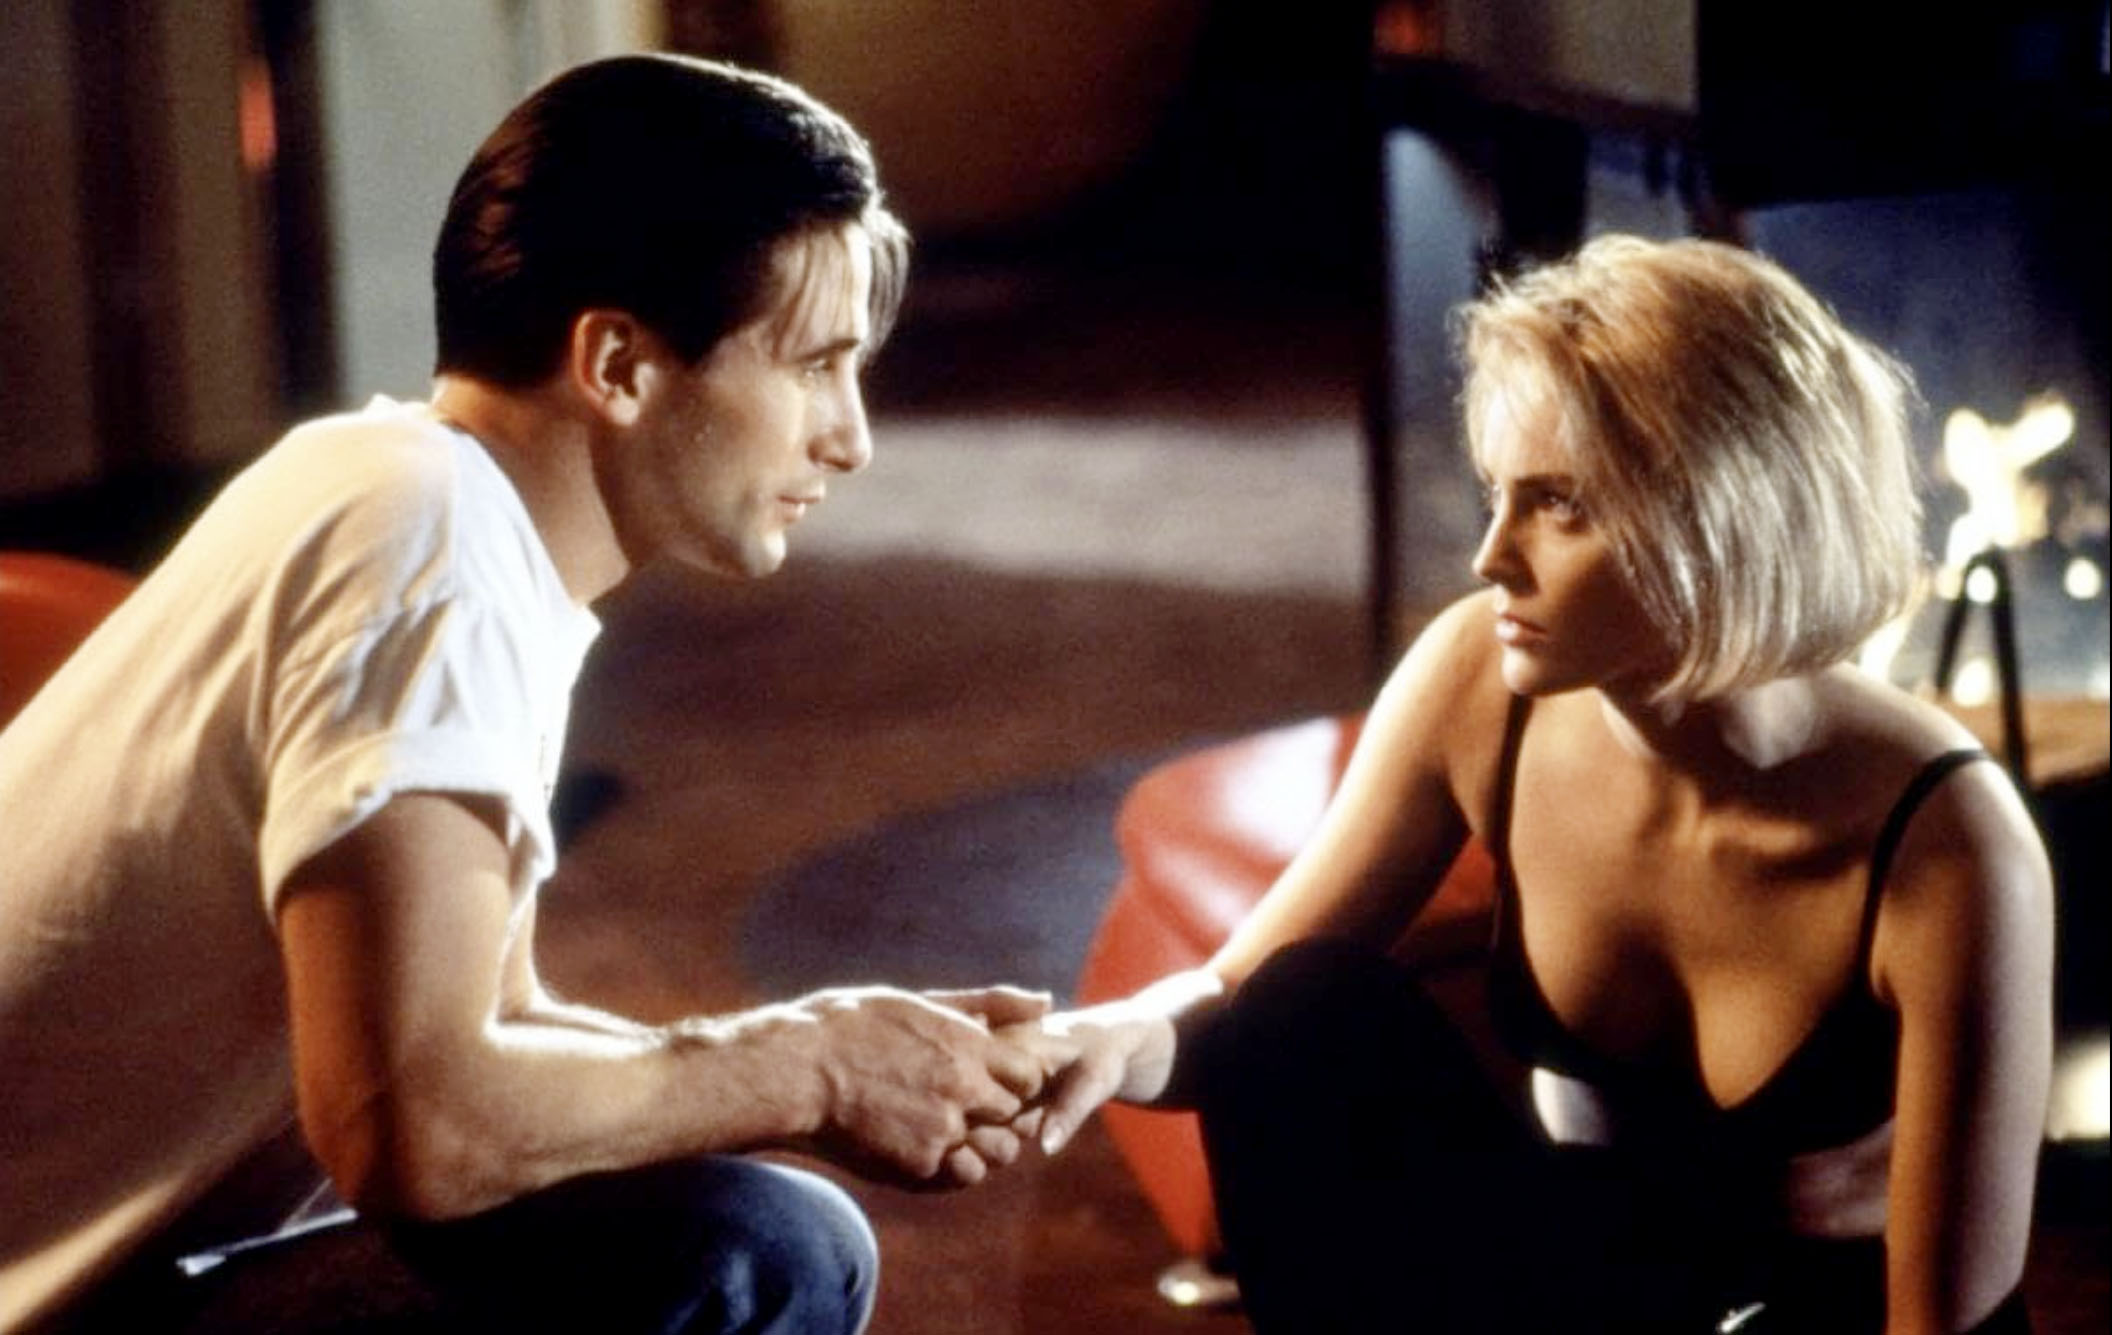 Billy Baldwin and Sharon Stone acting in "Sliver"